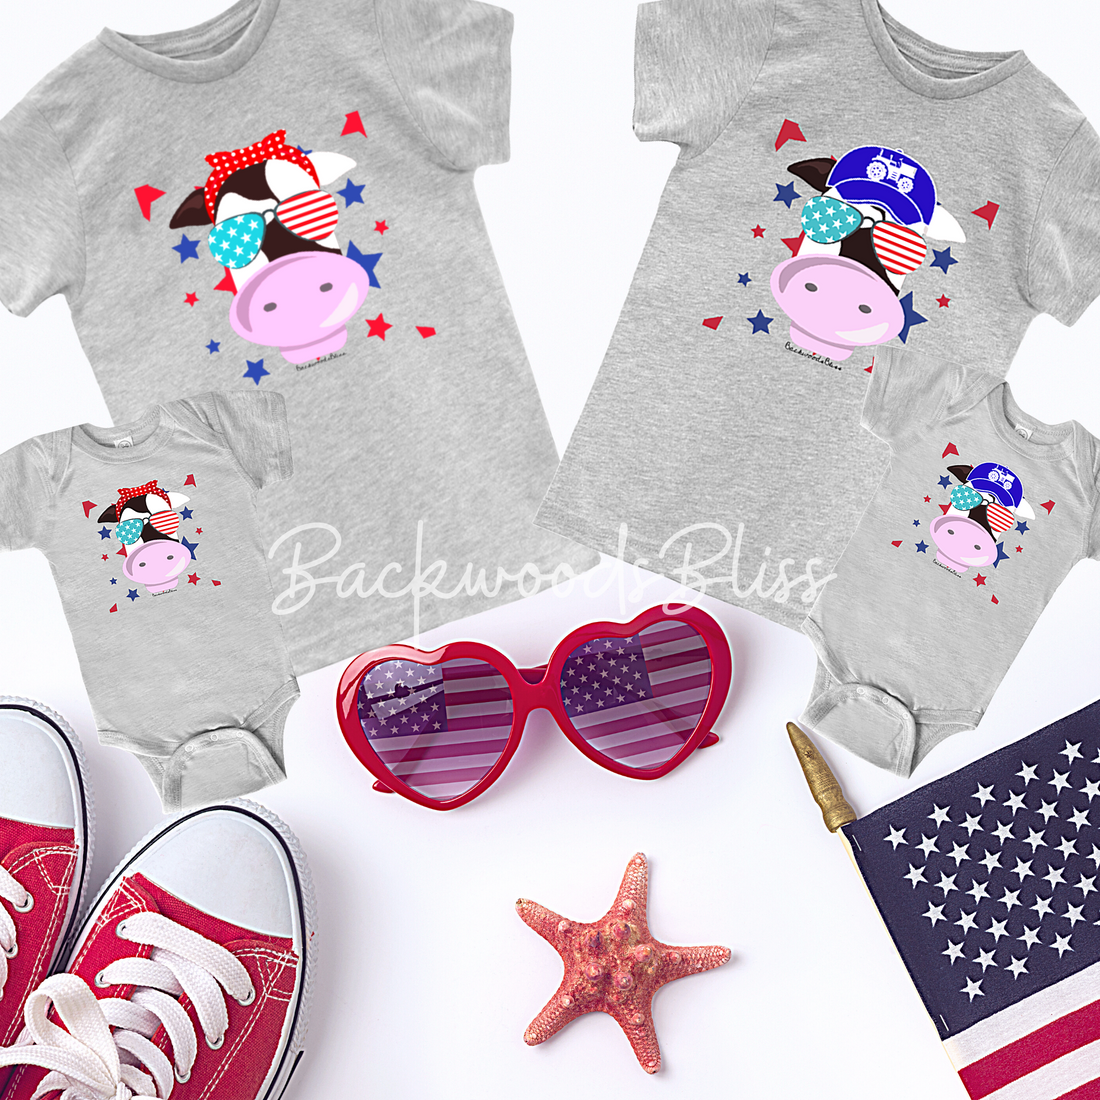 Bring on the fireworks & sparklers! Our 1st annual 4th of July line is HERE!